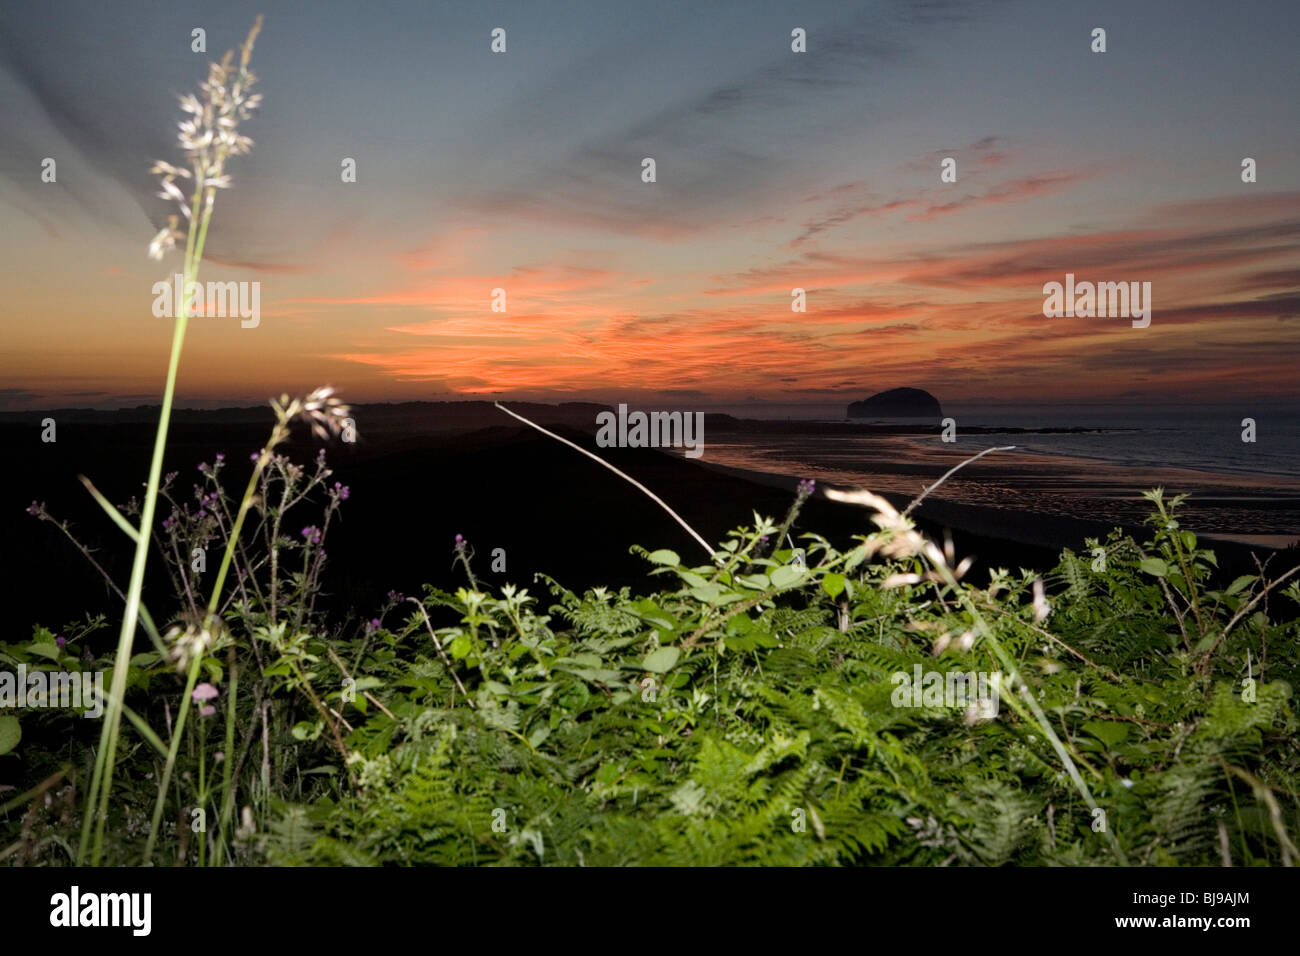 scottish coastline with lit up shrubs in the foreground Stock Photo